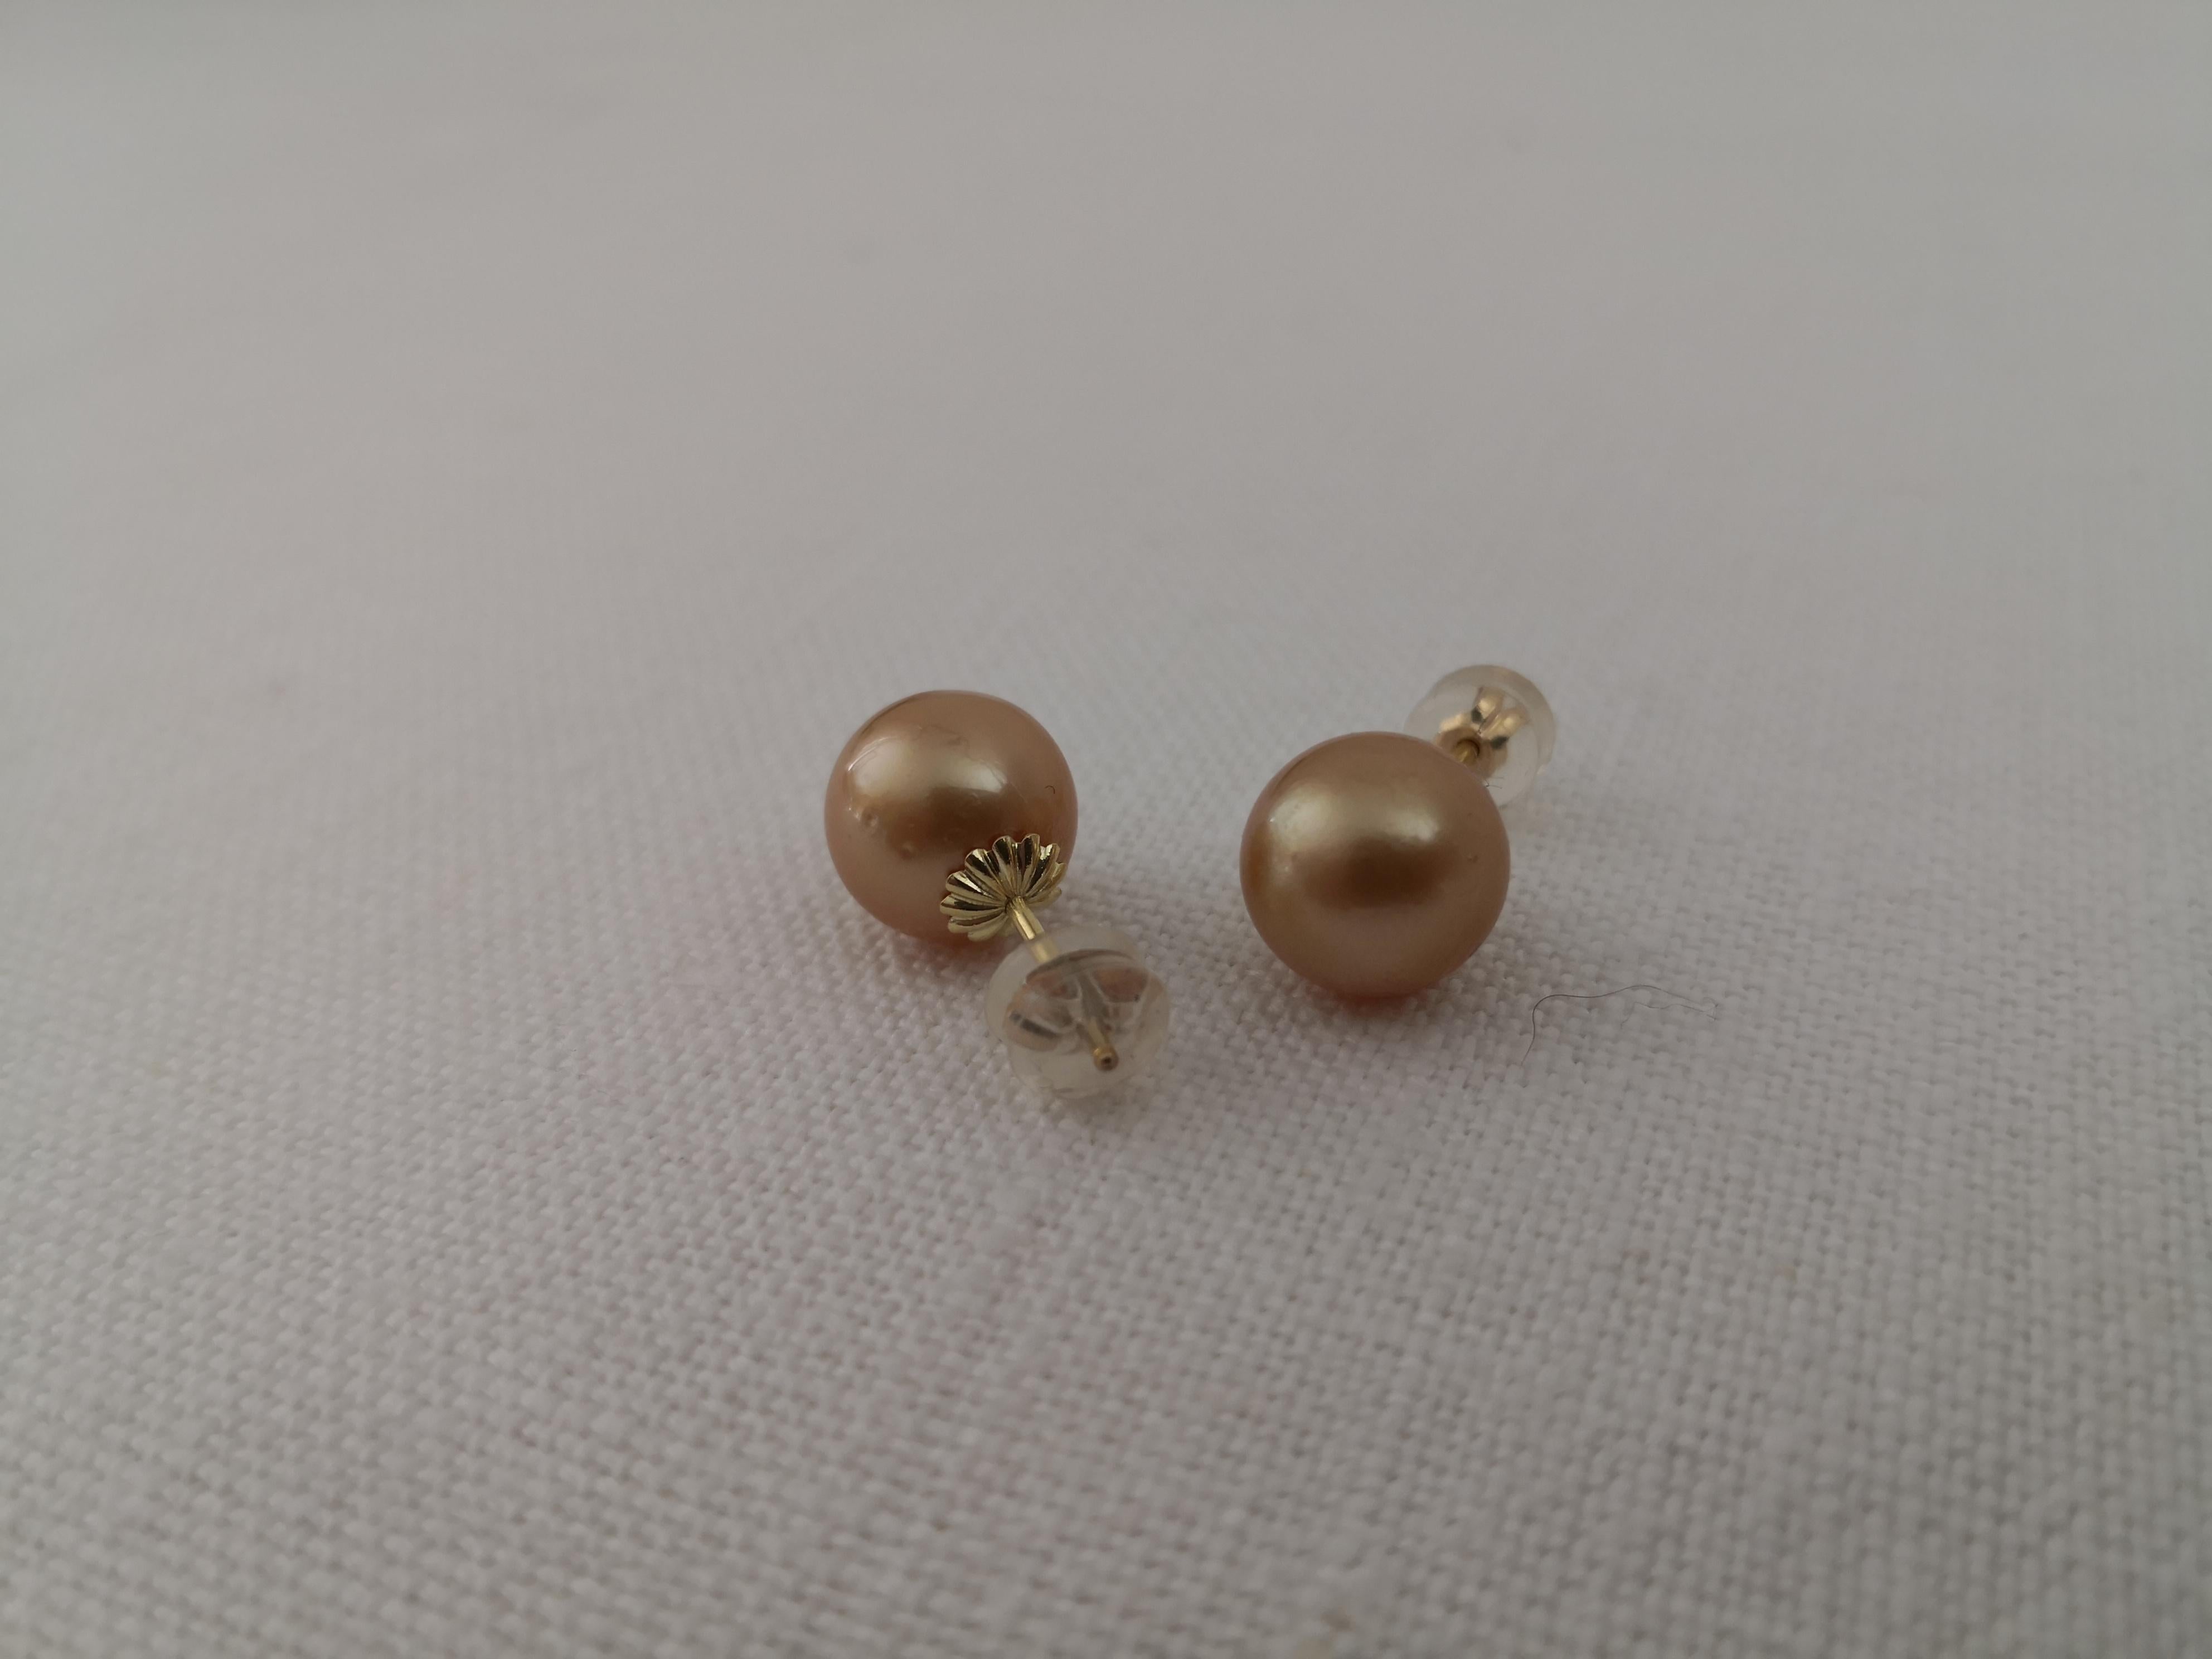 Natural Color South Sea Pearl Earrings 

- Origin: Indonesia ocean waters

- Produced by Pinctada Maxima Oyster

- 18 karats Gold mounting

- Total weight of 4.60 grams

- Size of Pearls 11 mm of diameter

- Pearl beautiful quality

- Round Shape